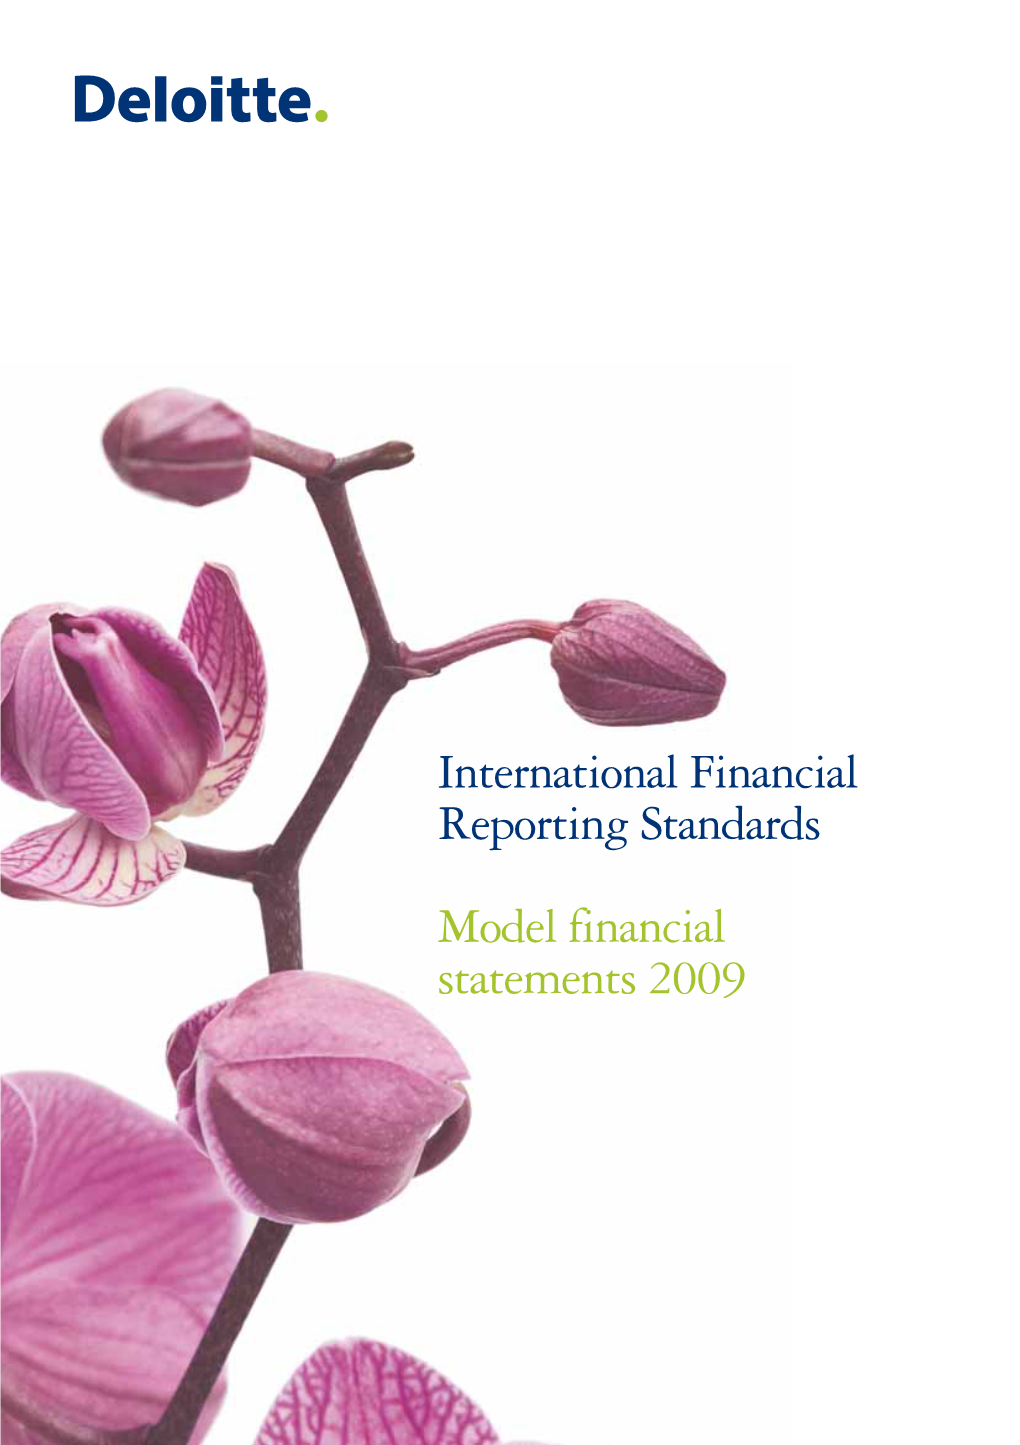 IFRS Model Financial Statements for 2009